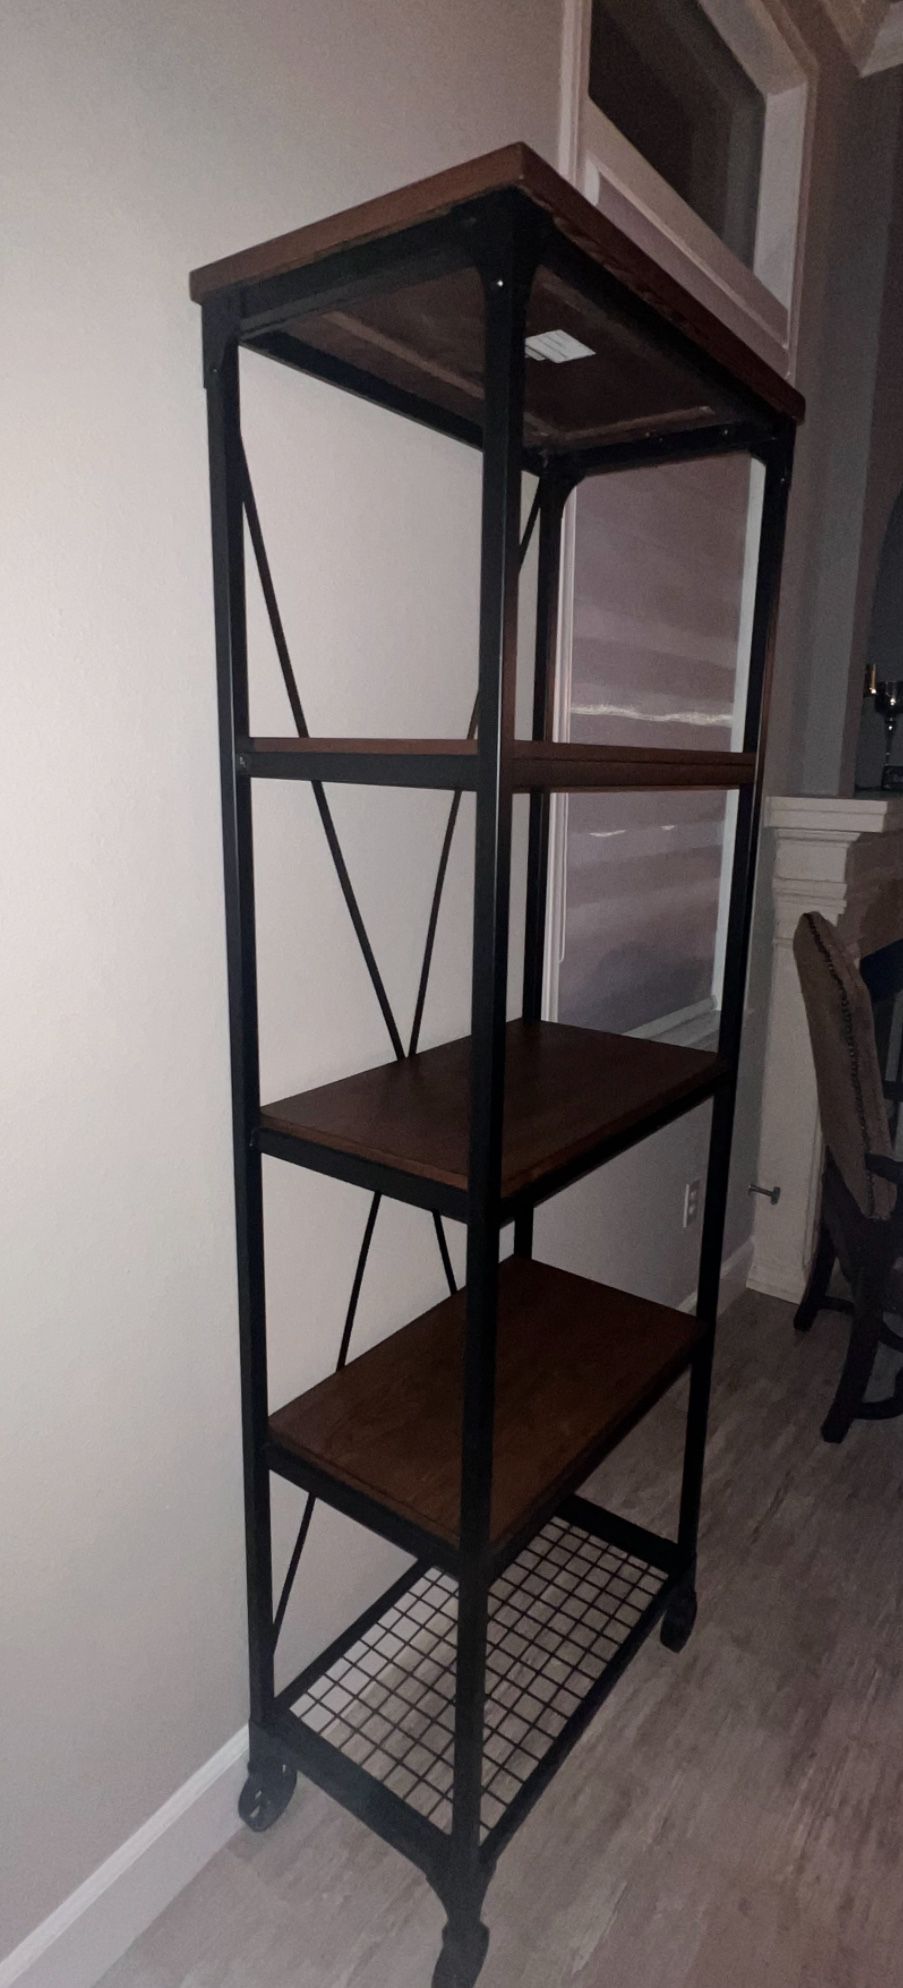 Bookcases or Bakers Rack